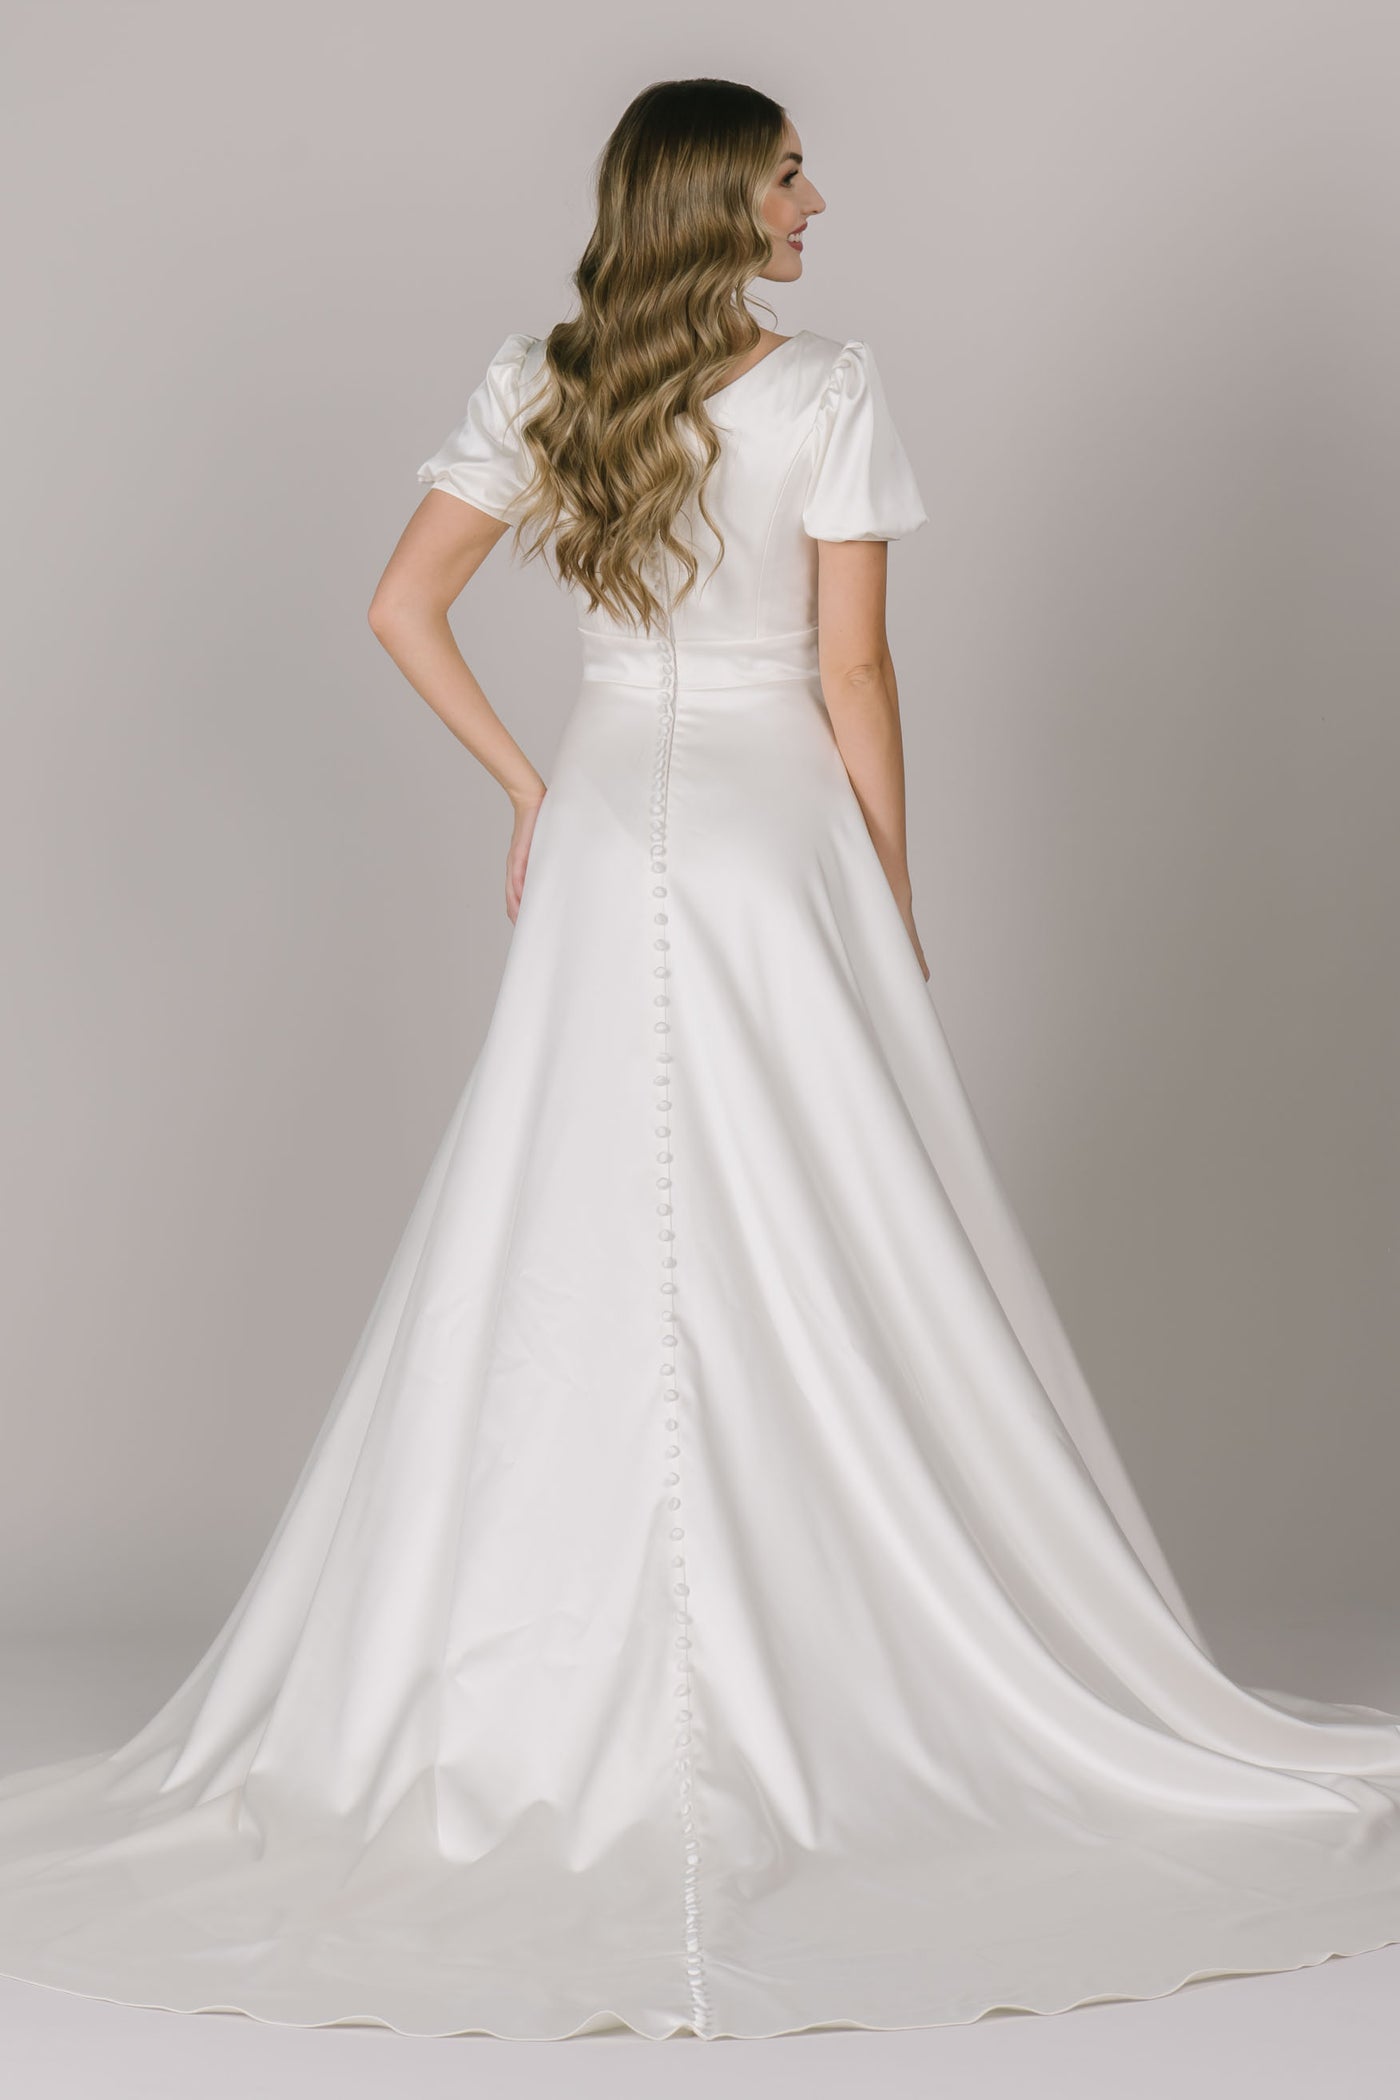 Another back angle of a soft, romantic, and modest wedding dress in Utah with beautiful puff sleeves, pockets, and a beautiful waistline!